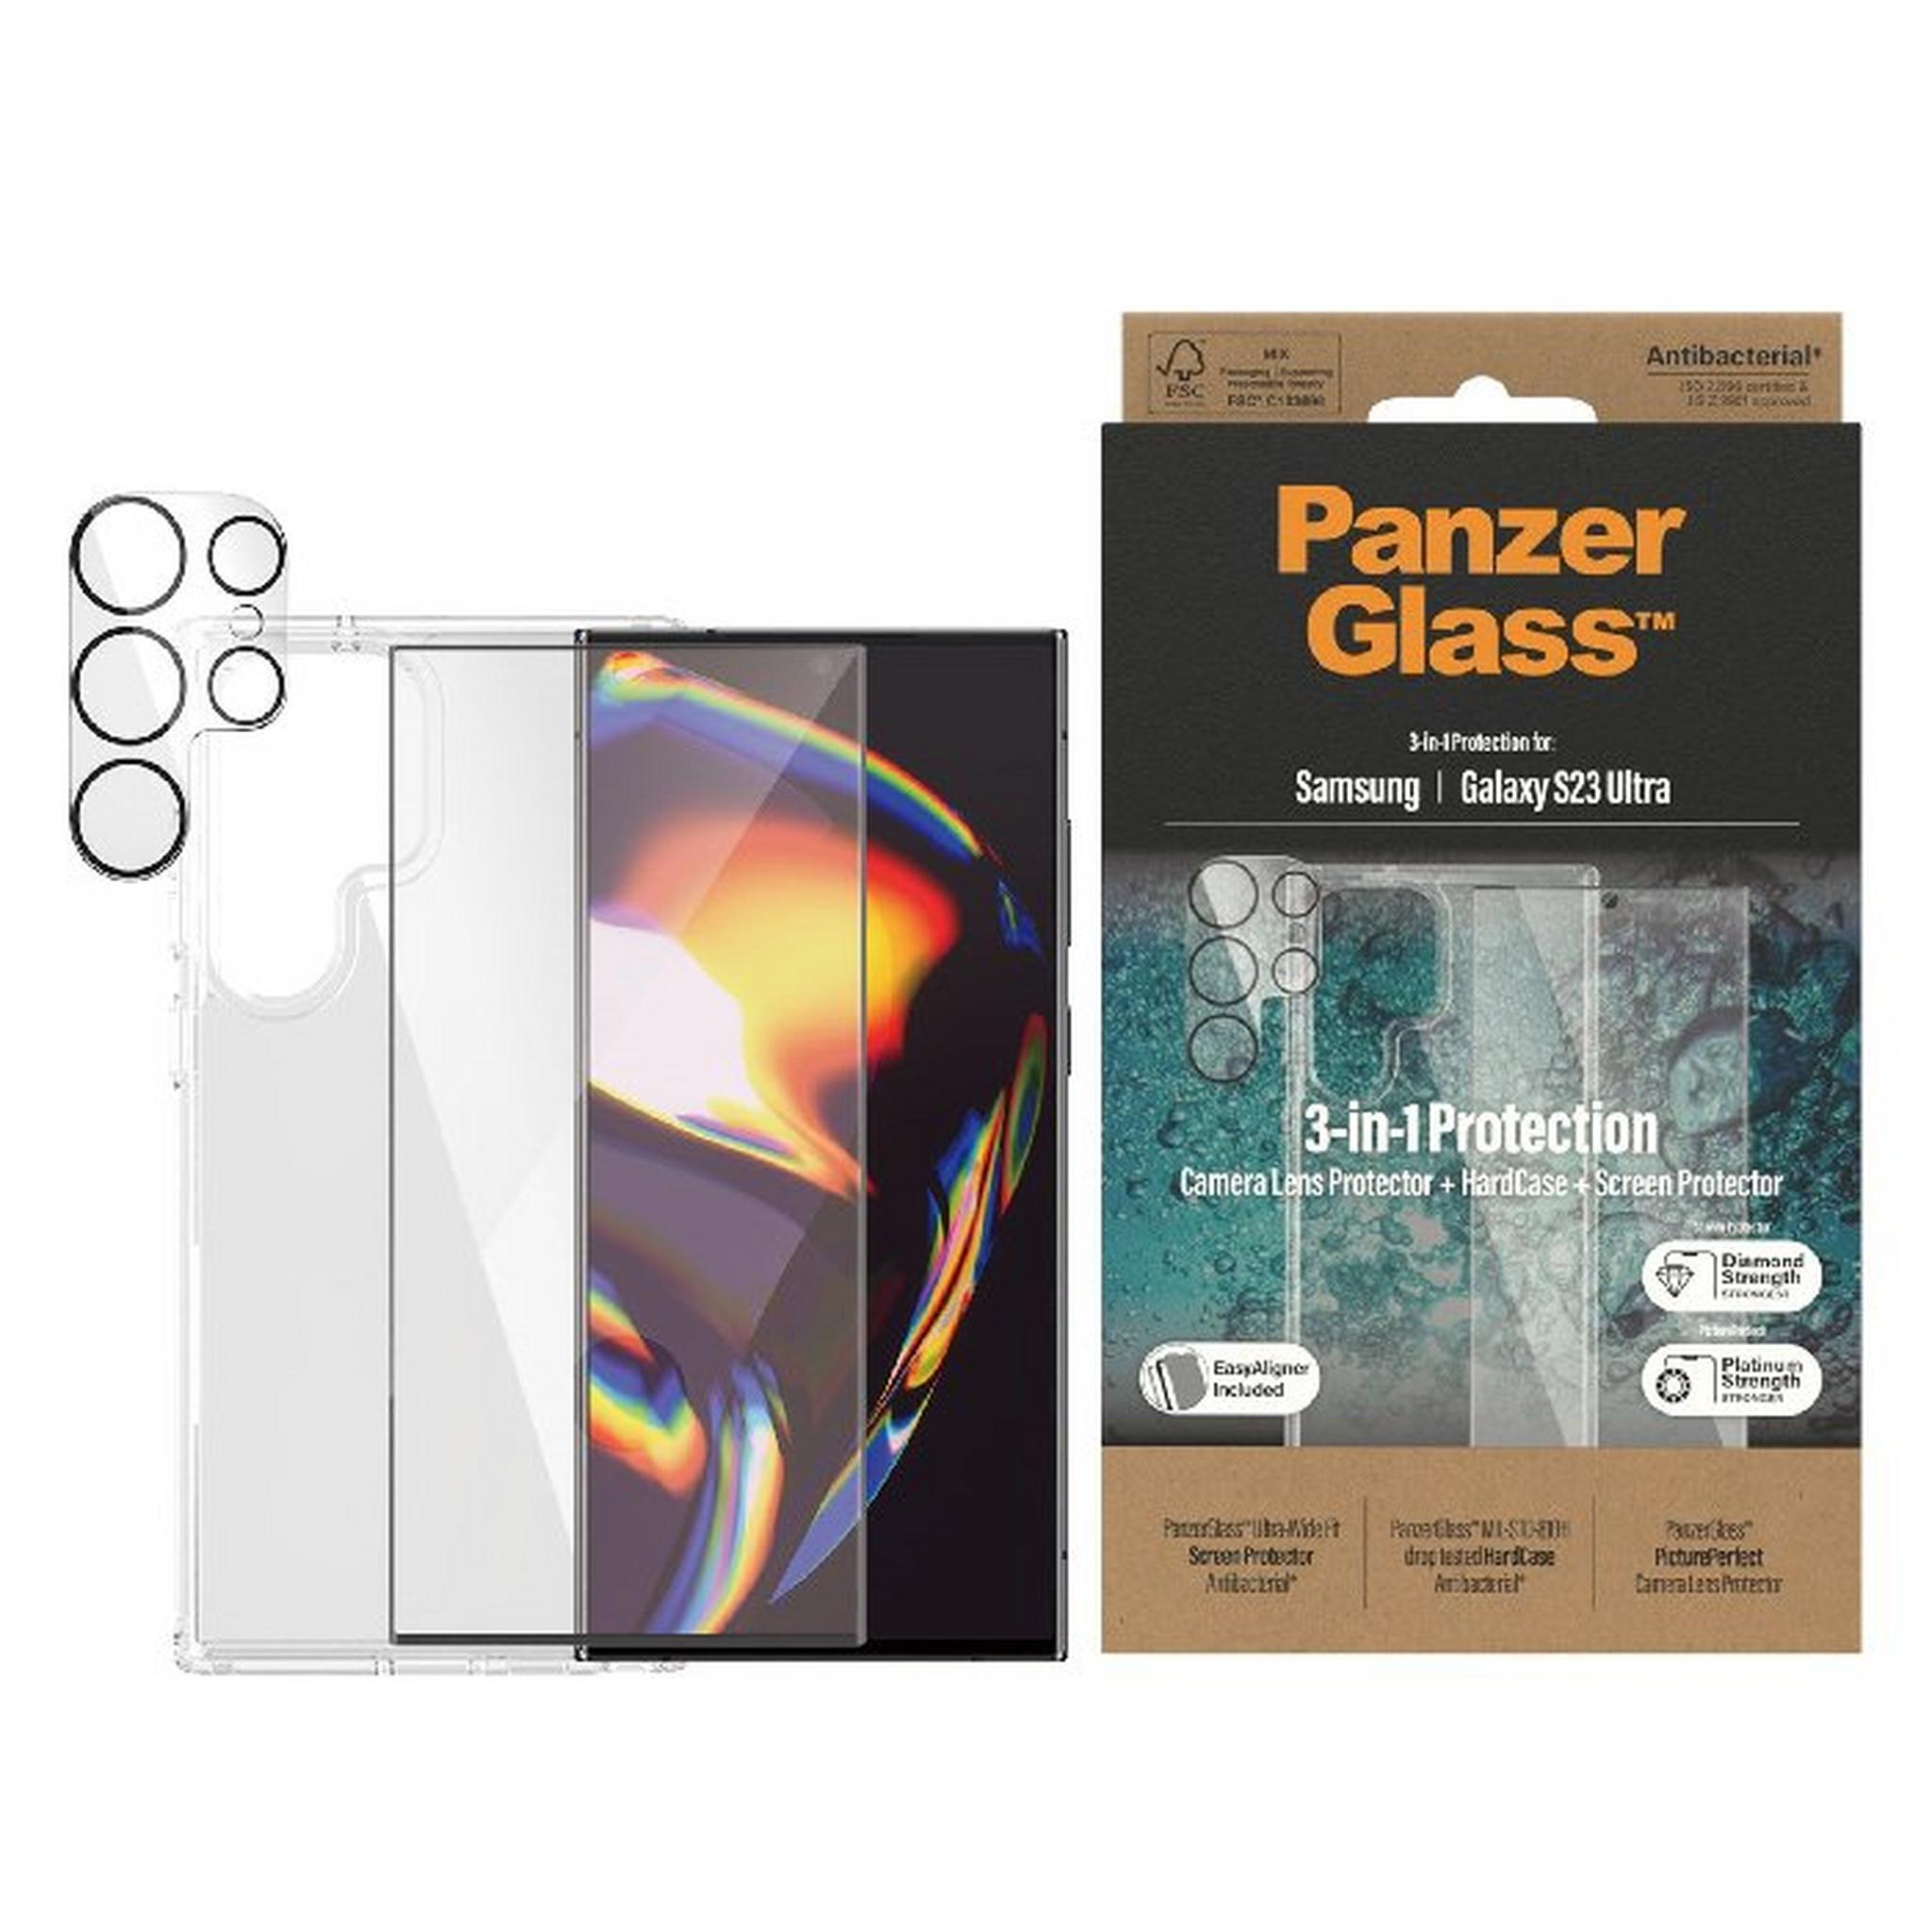 Panzerglass 3 In 1 Camera Lens Protector, HardCase and an Screen Protector For Samsung Galaxy S23 Ultra - B0435+7317